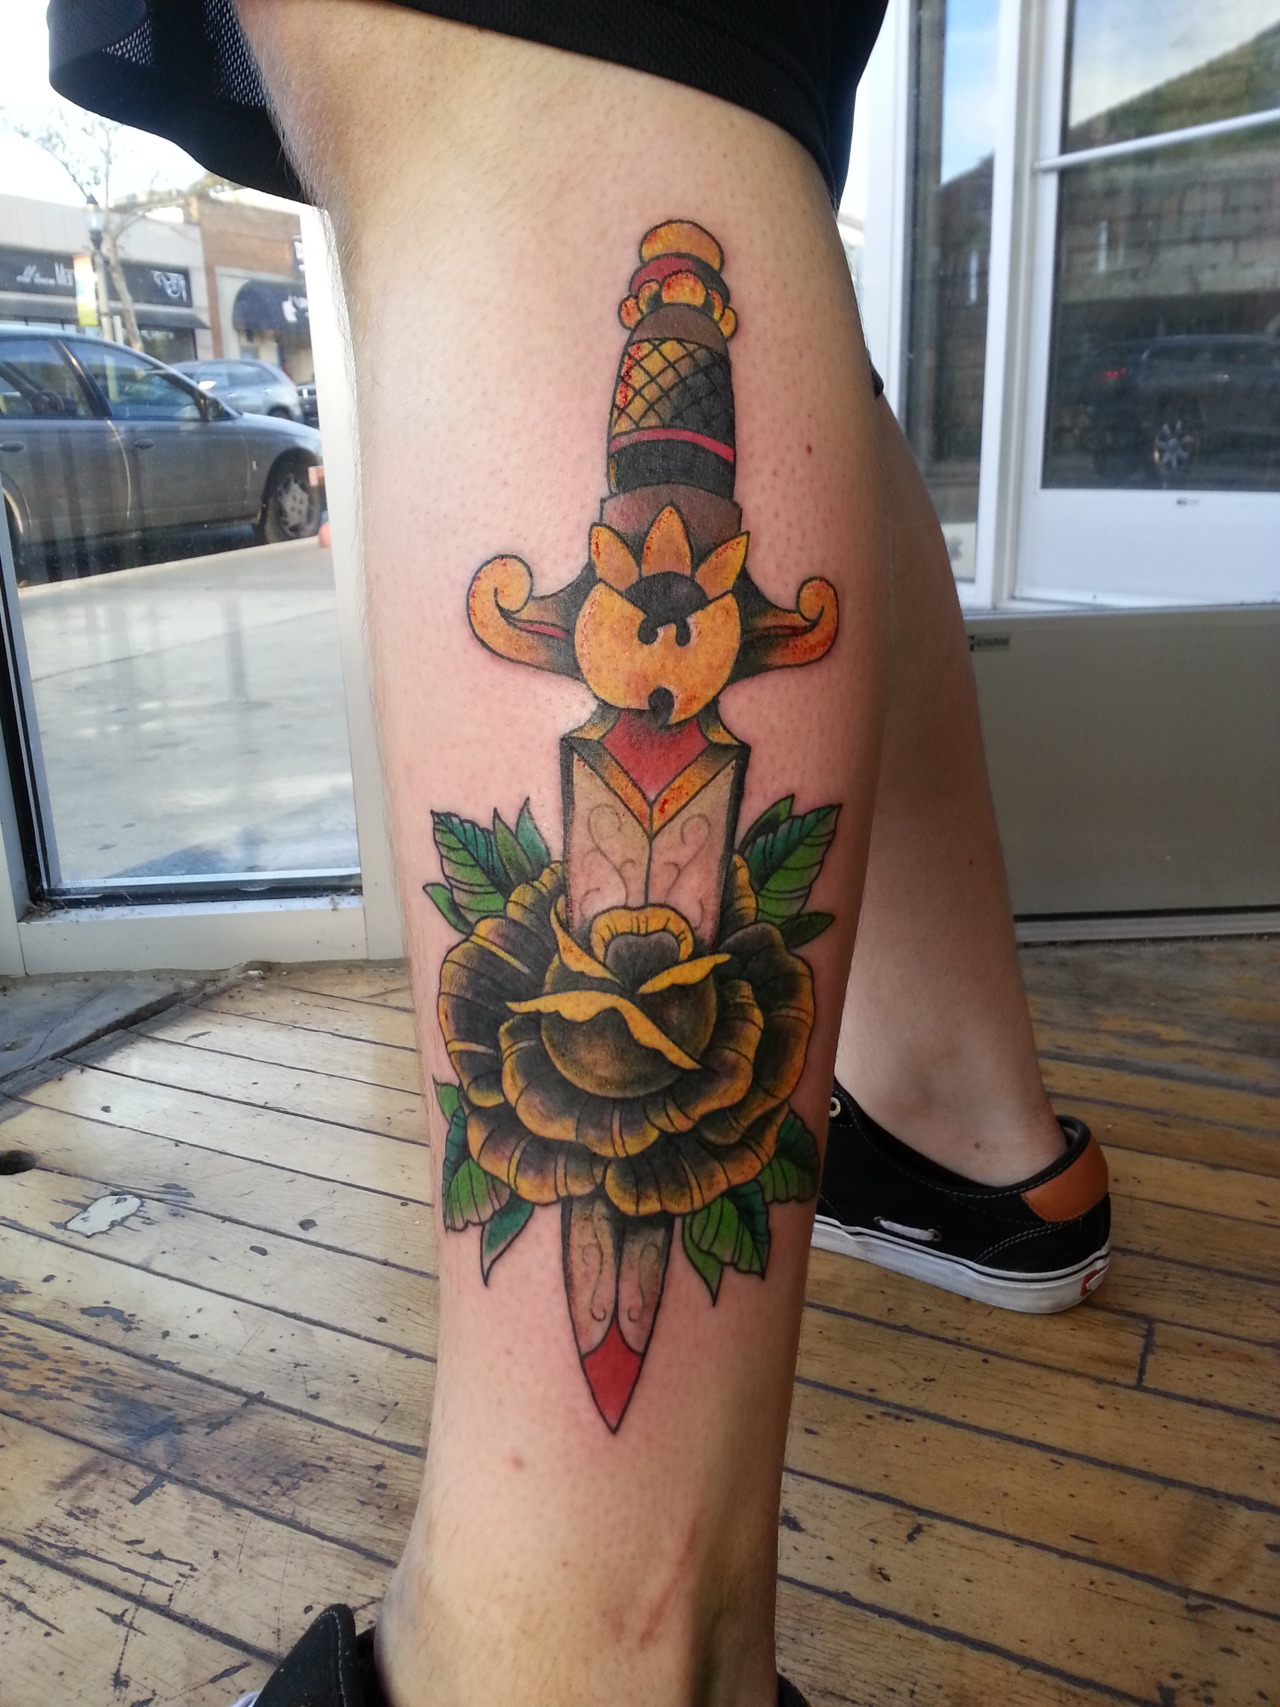 Rose and Dagger tattoo by Chris Boilore at Fish Ladder Tattoo in Lansing MI   rtraditionaltattoos